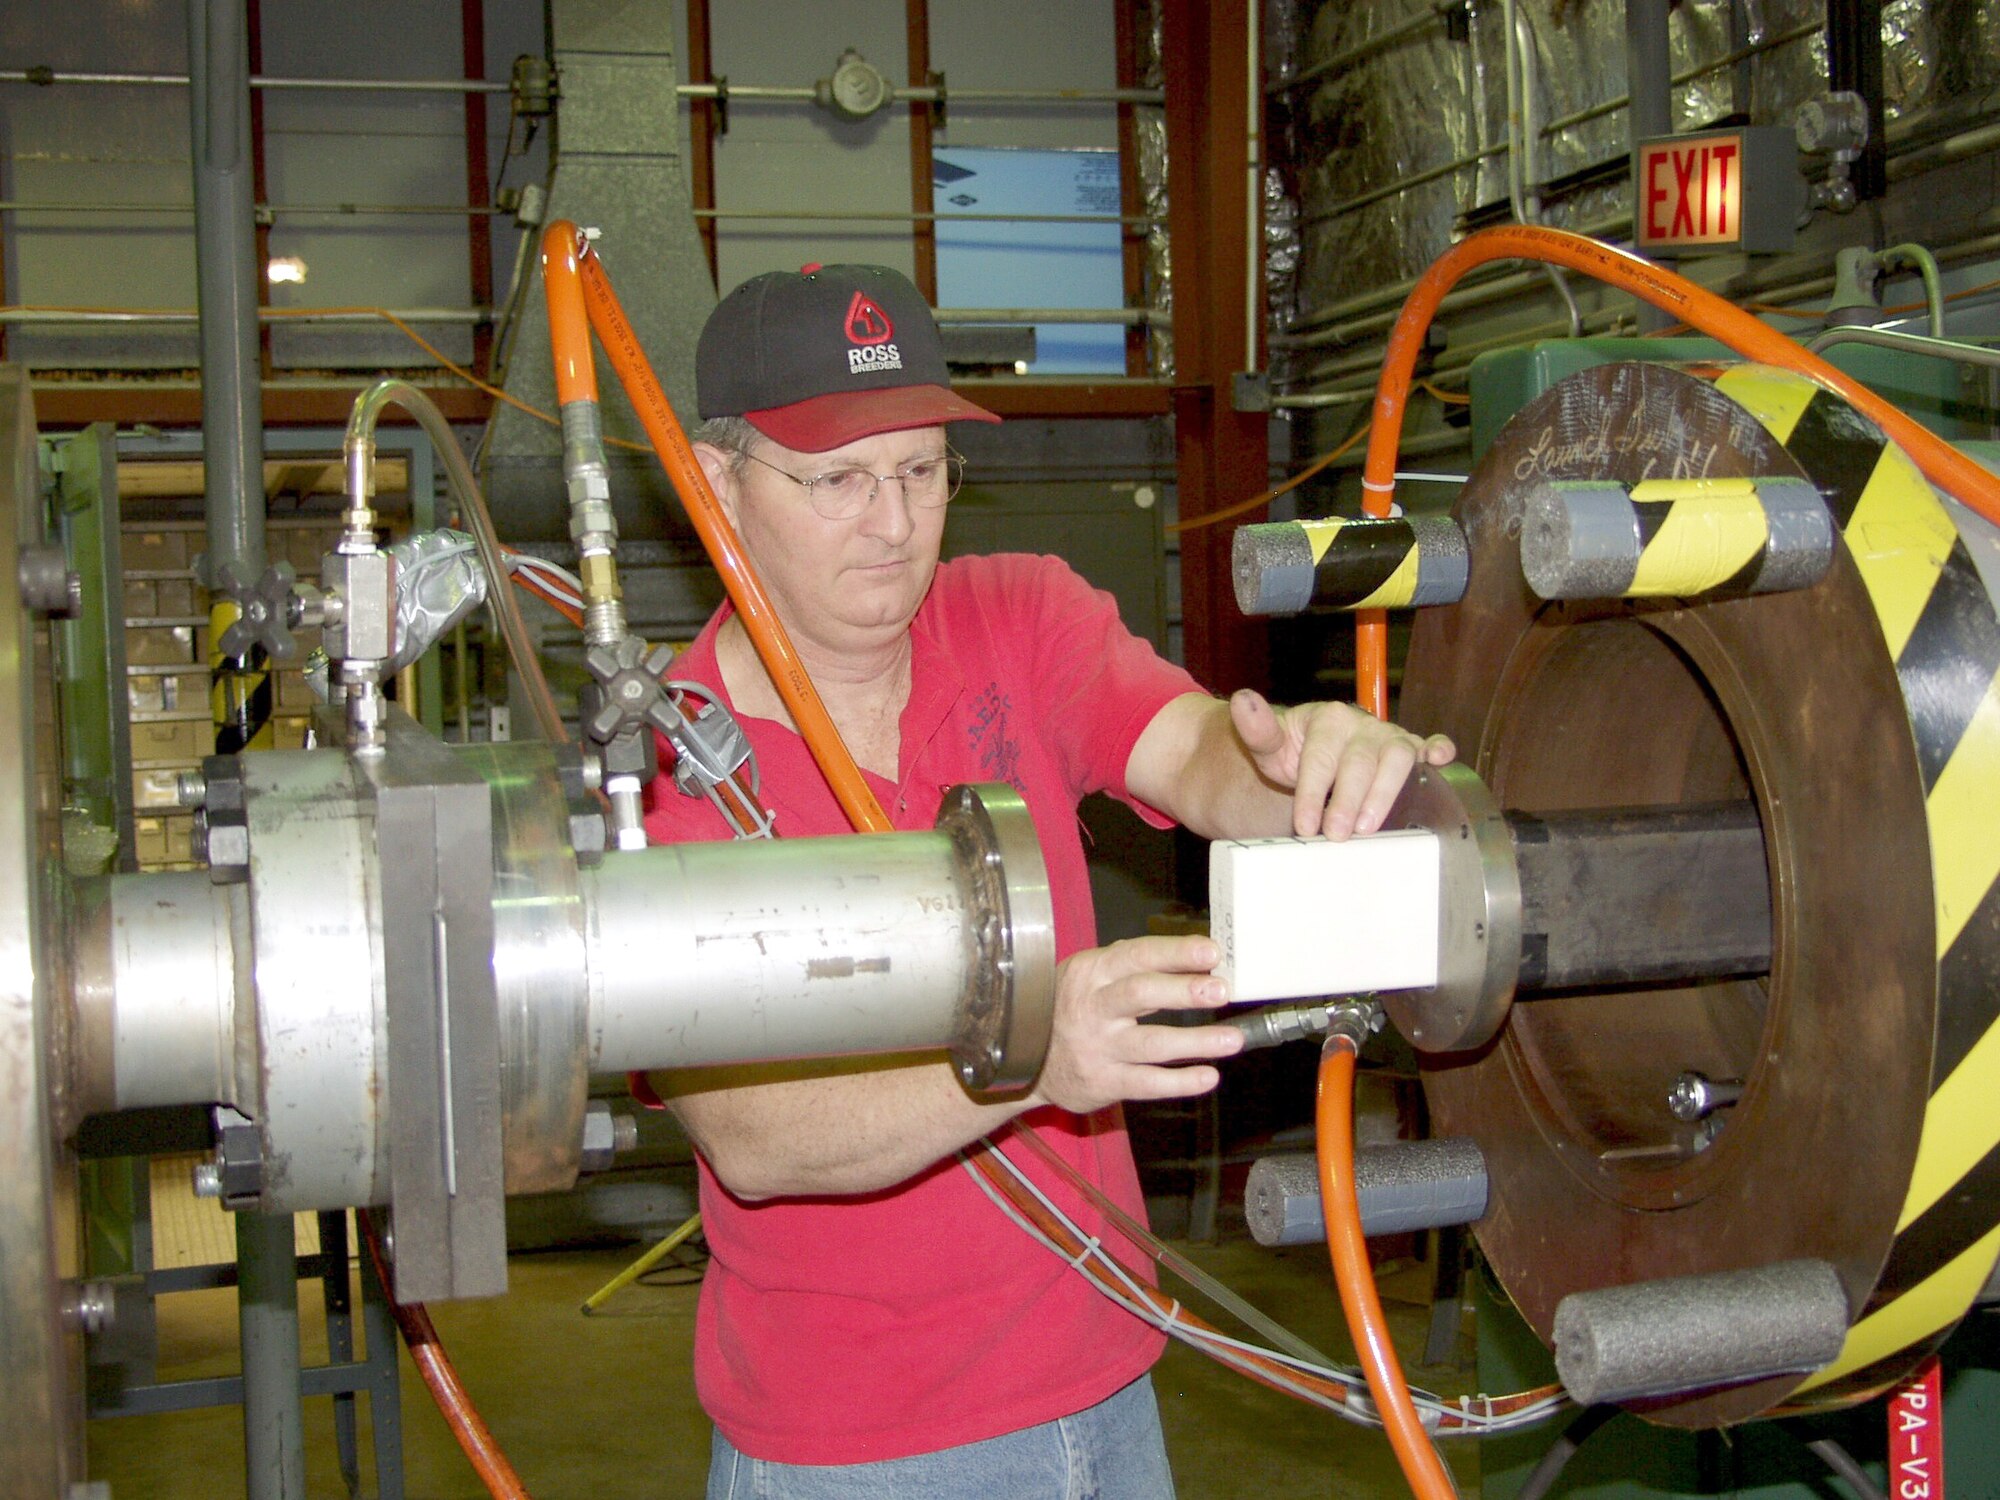 ARNOLD AIR FORCE BASE, Tenn. -- Machinist Larry Phipps loads a foam projectile into an 86-foot-long rectangular barrel used to conduct impact testing for the space shuttle return-to-flight program at the Arnold Engineering Development Center here.  (U.S. Air Force photo)